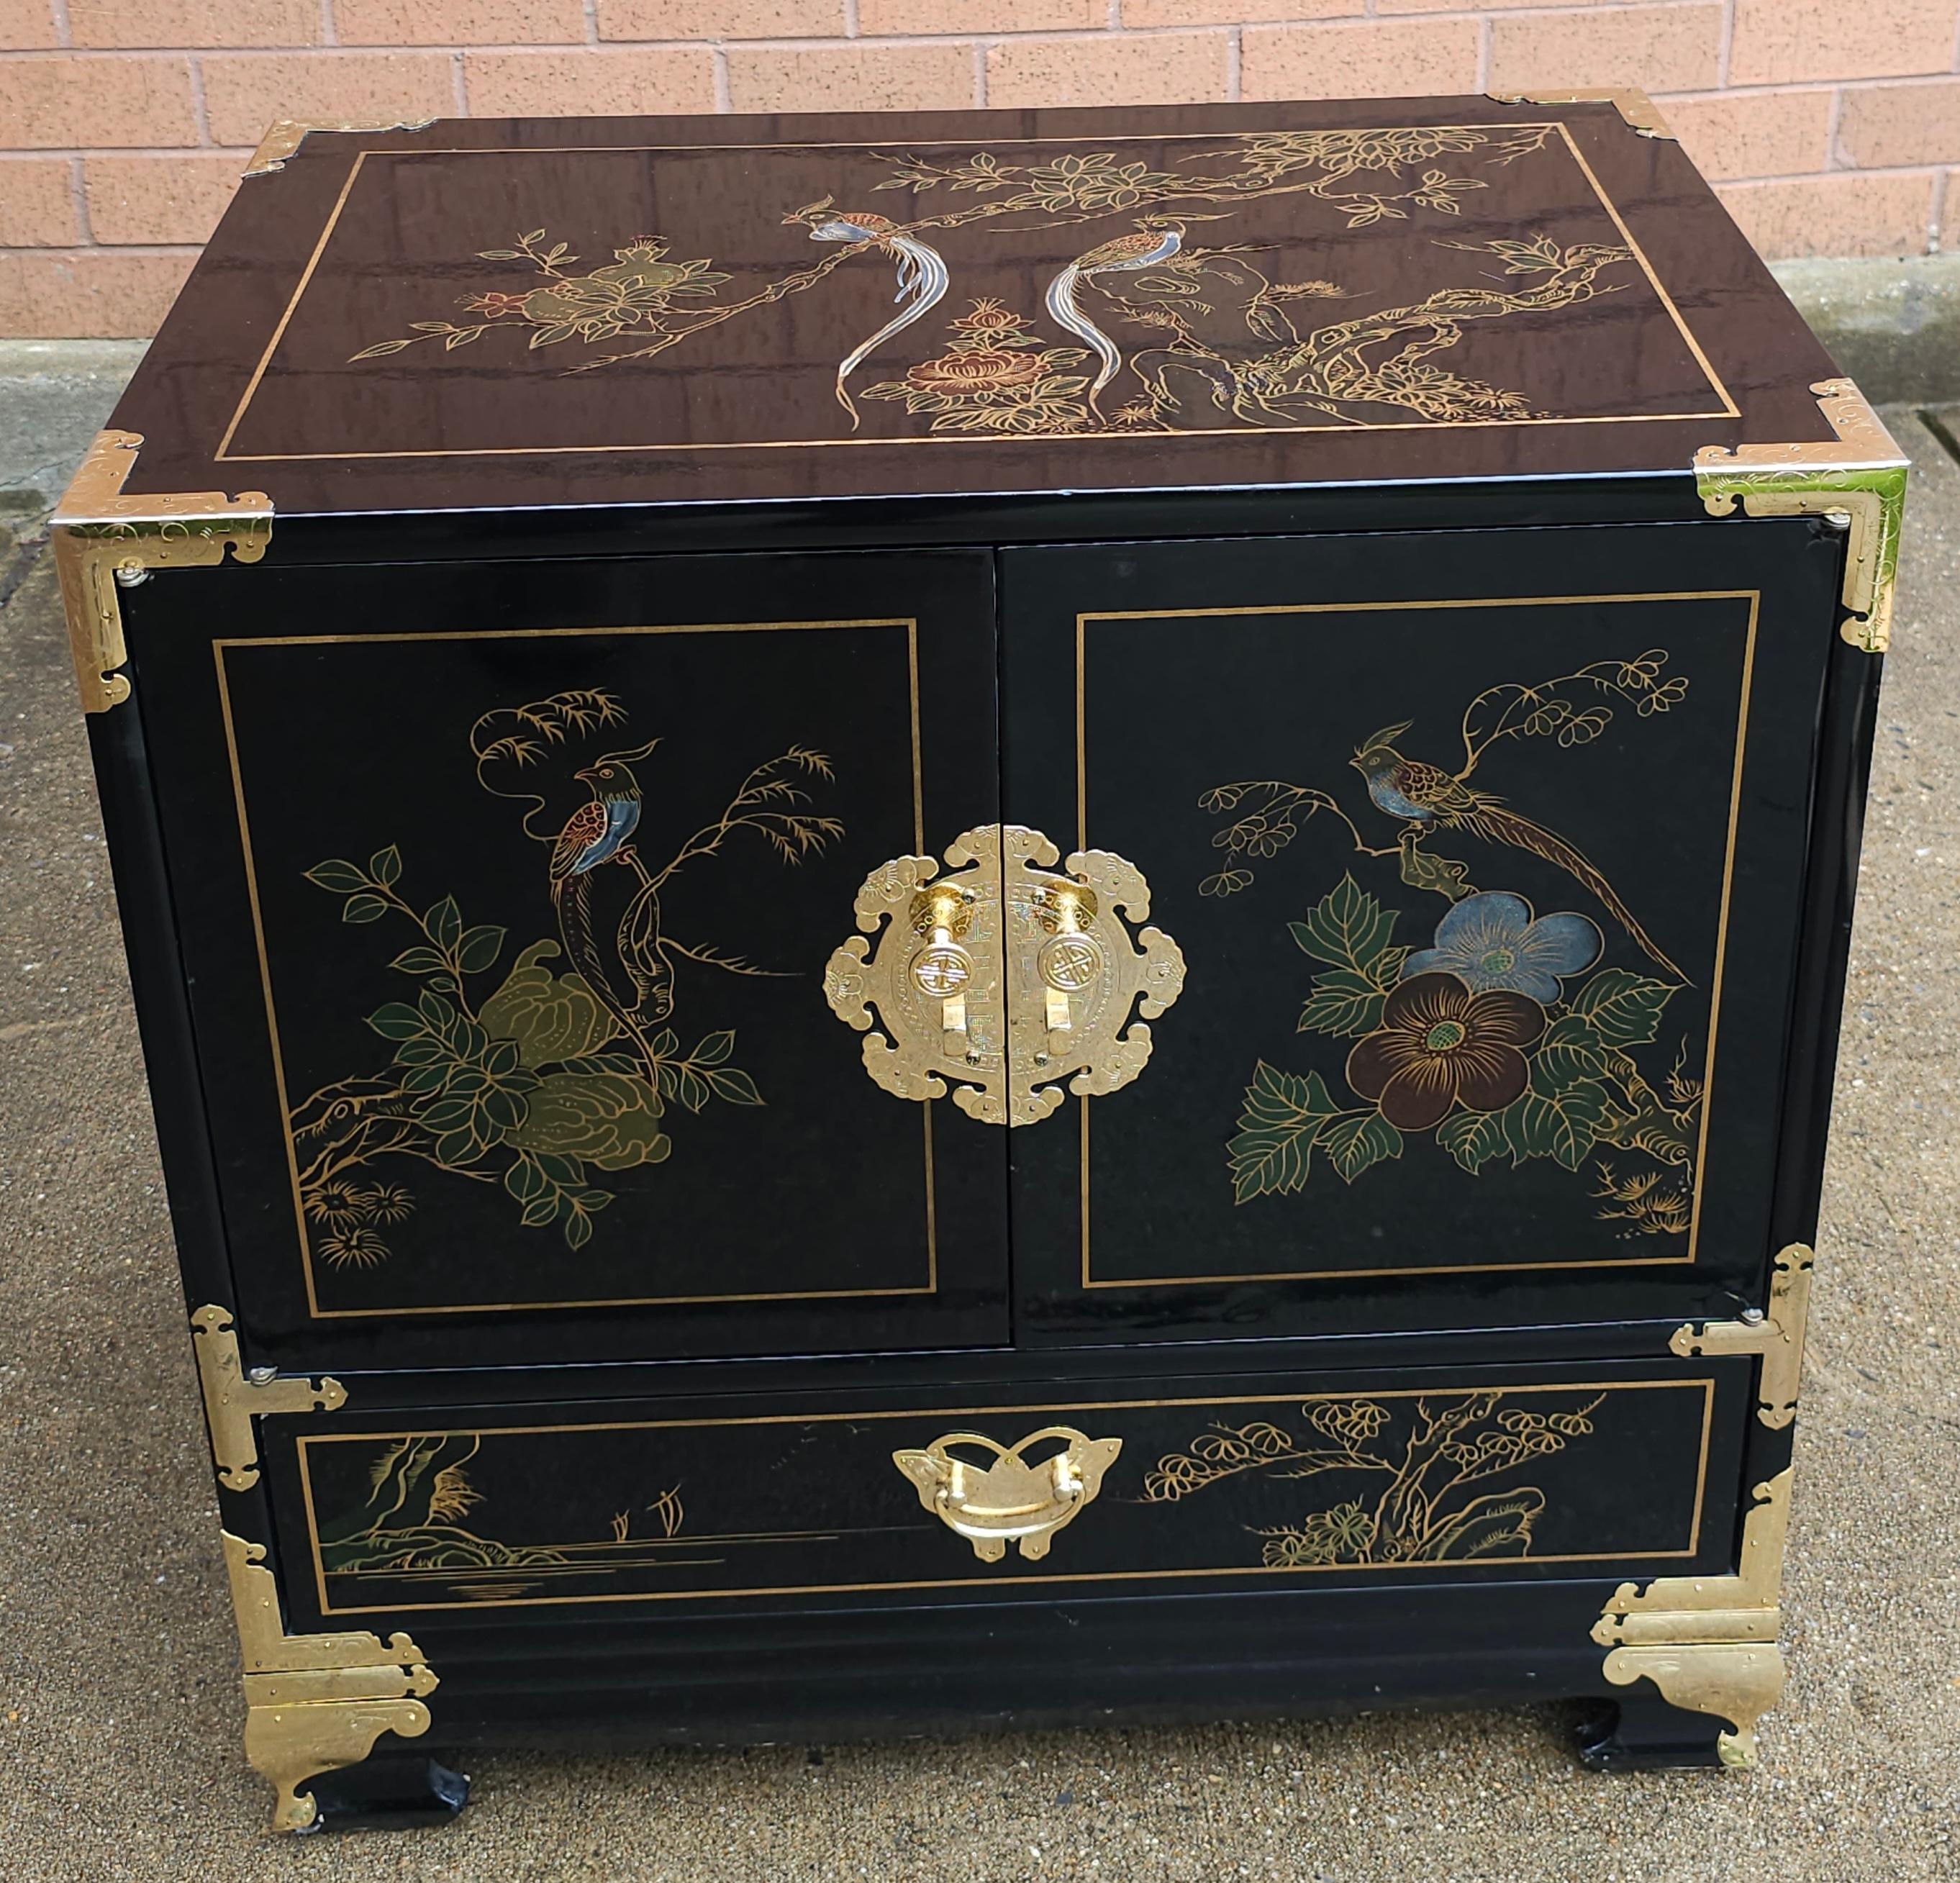 A beautiful Black Lacquered and Brass Mounted Chinoiserie Decorated Side Cabinet in great vintage condition. Measures 24